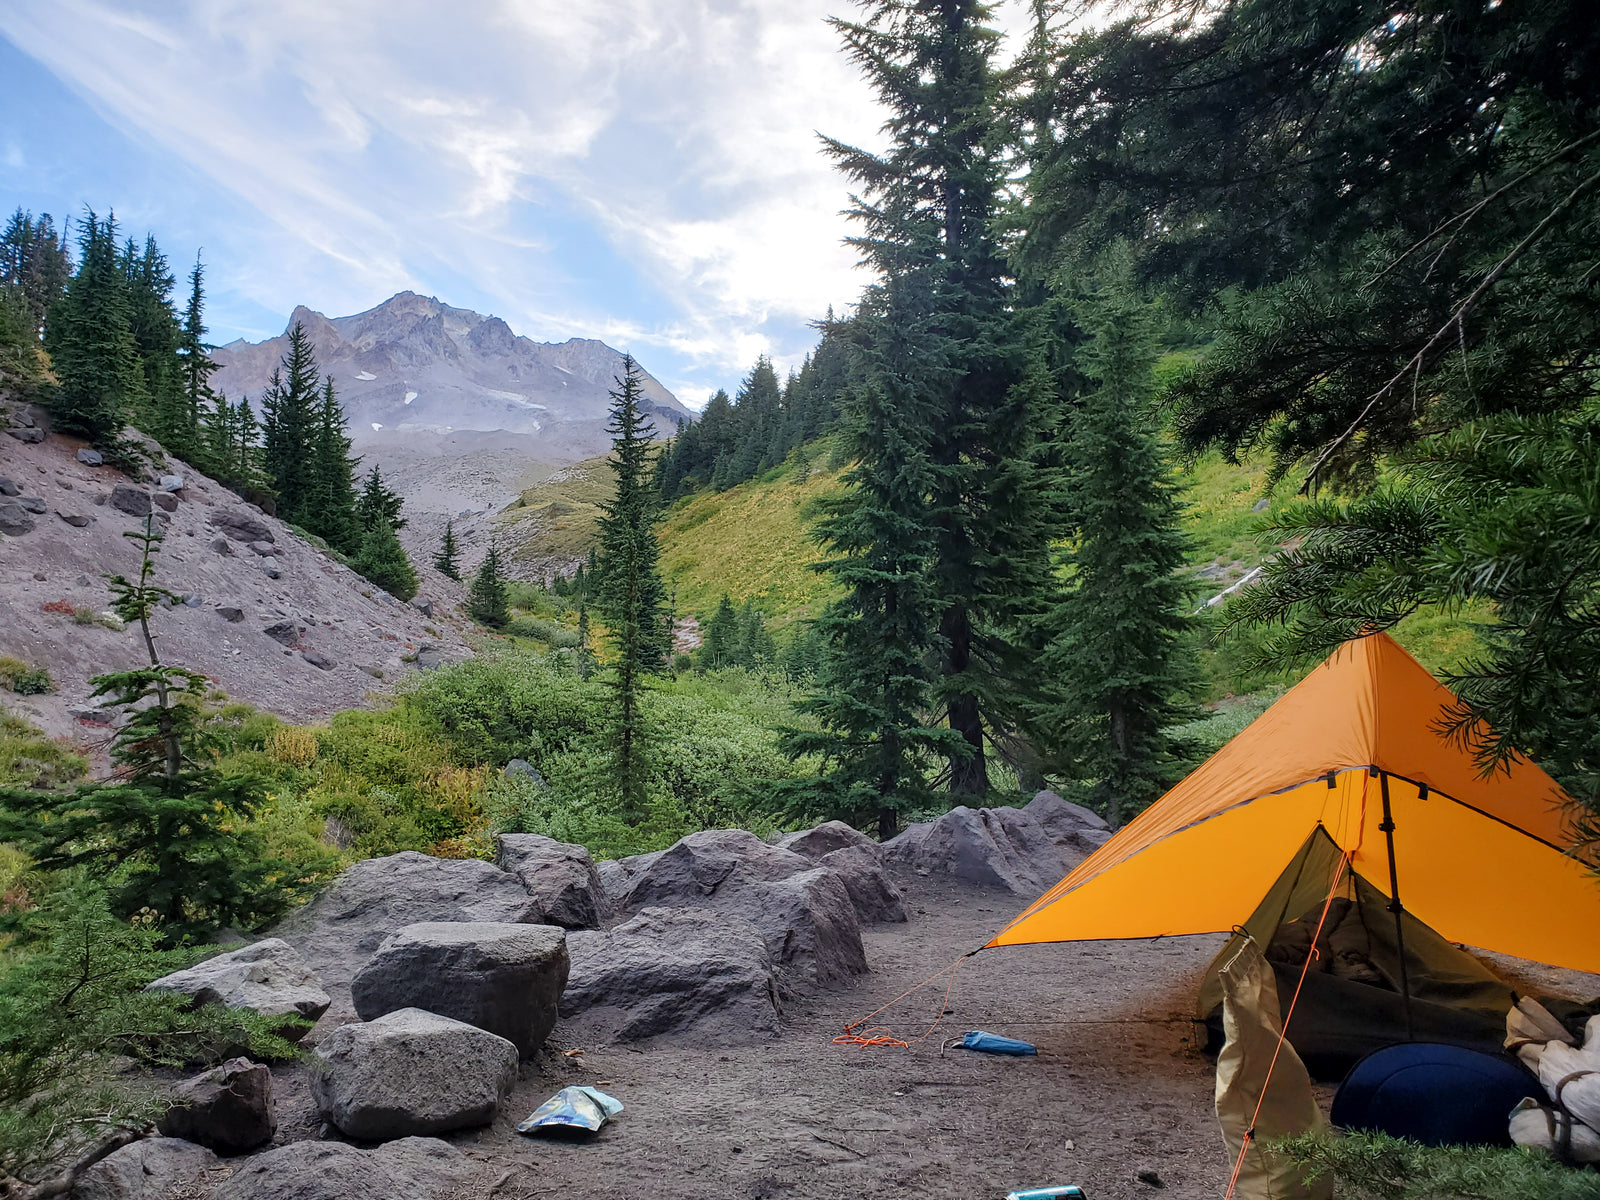 Trip Report: Adrian on the Timberline Trail